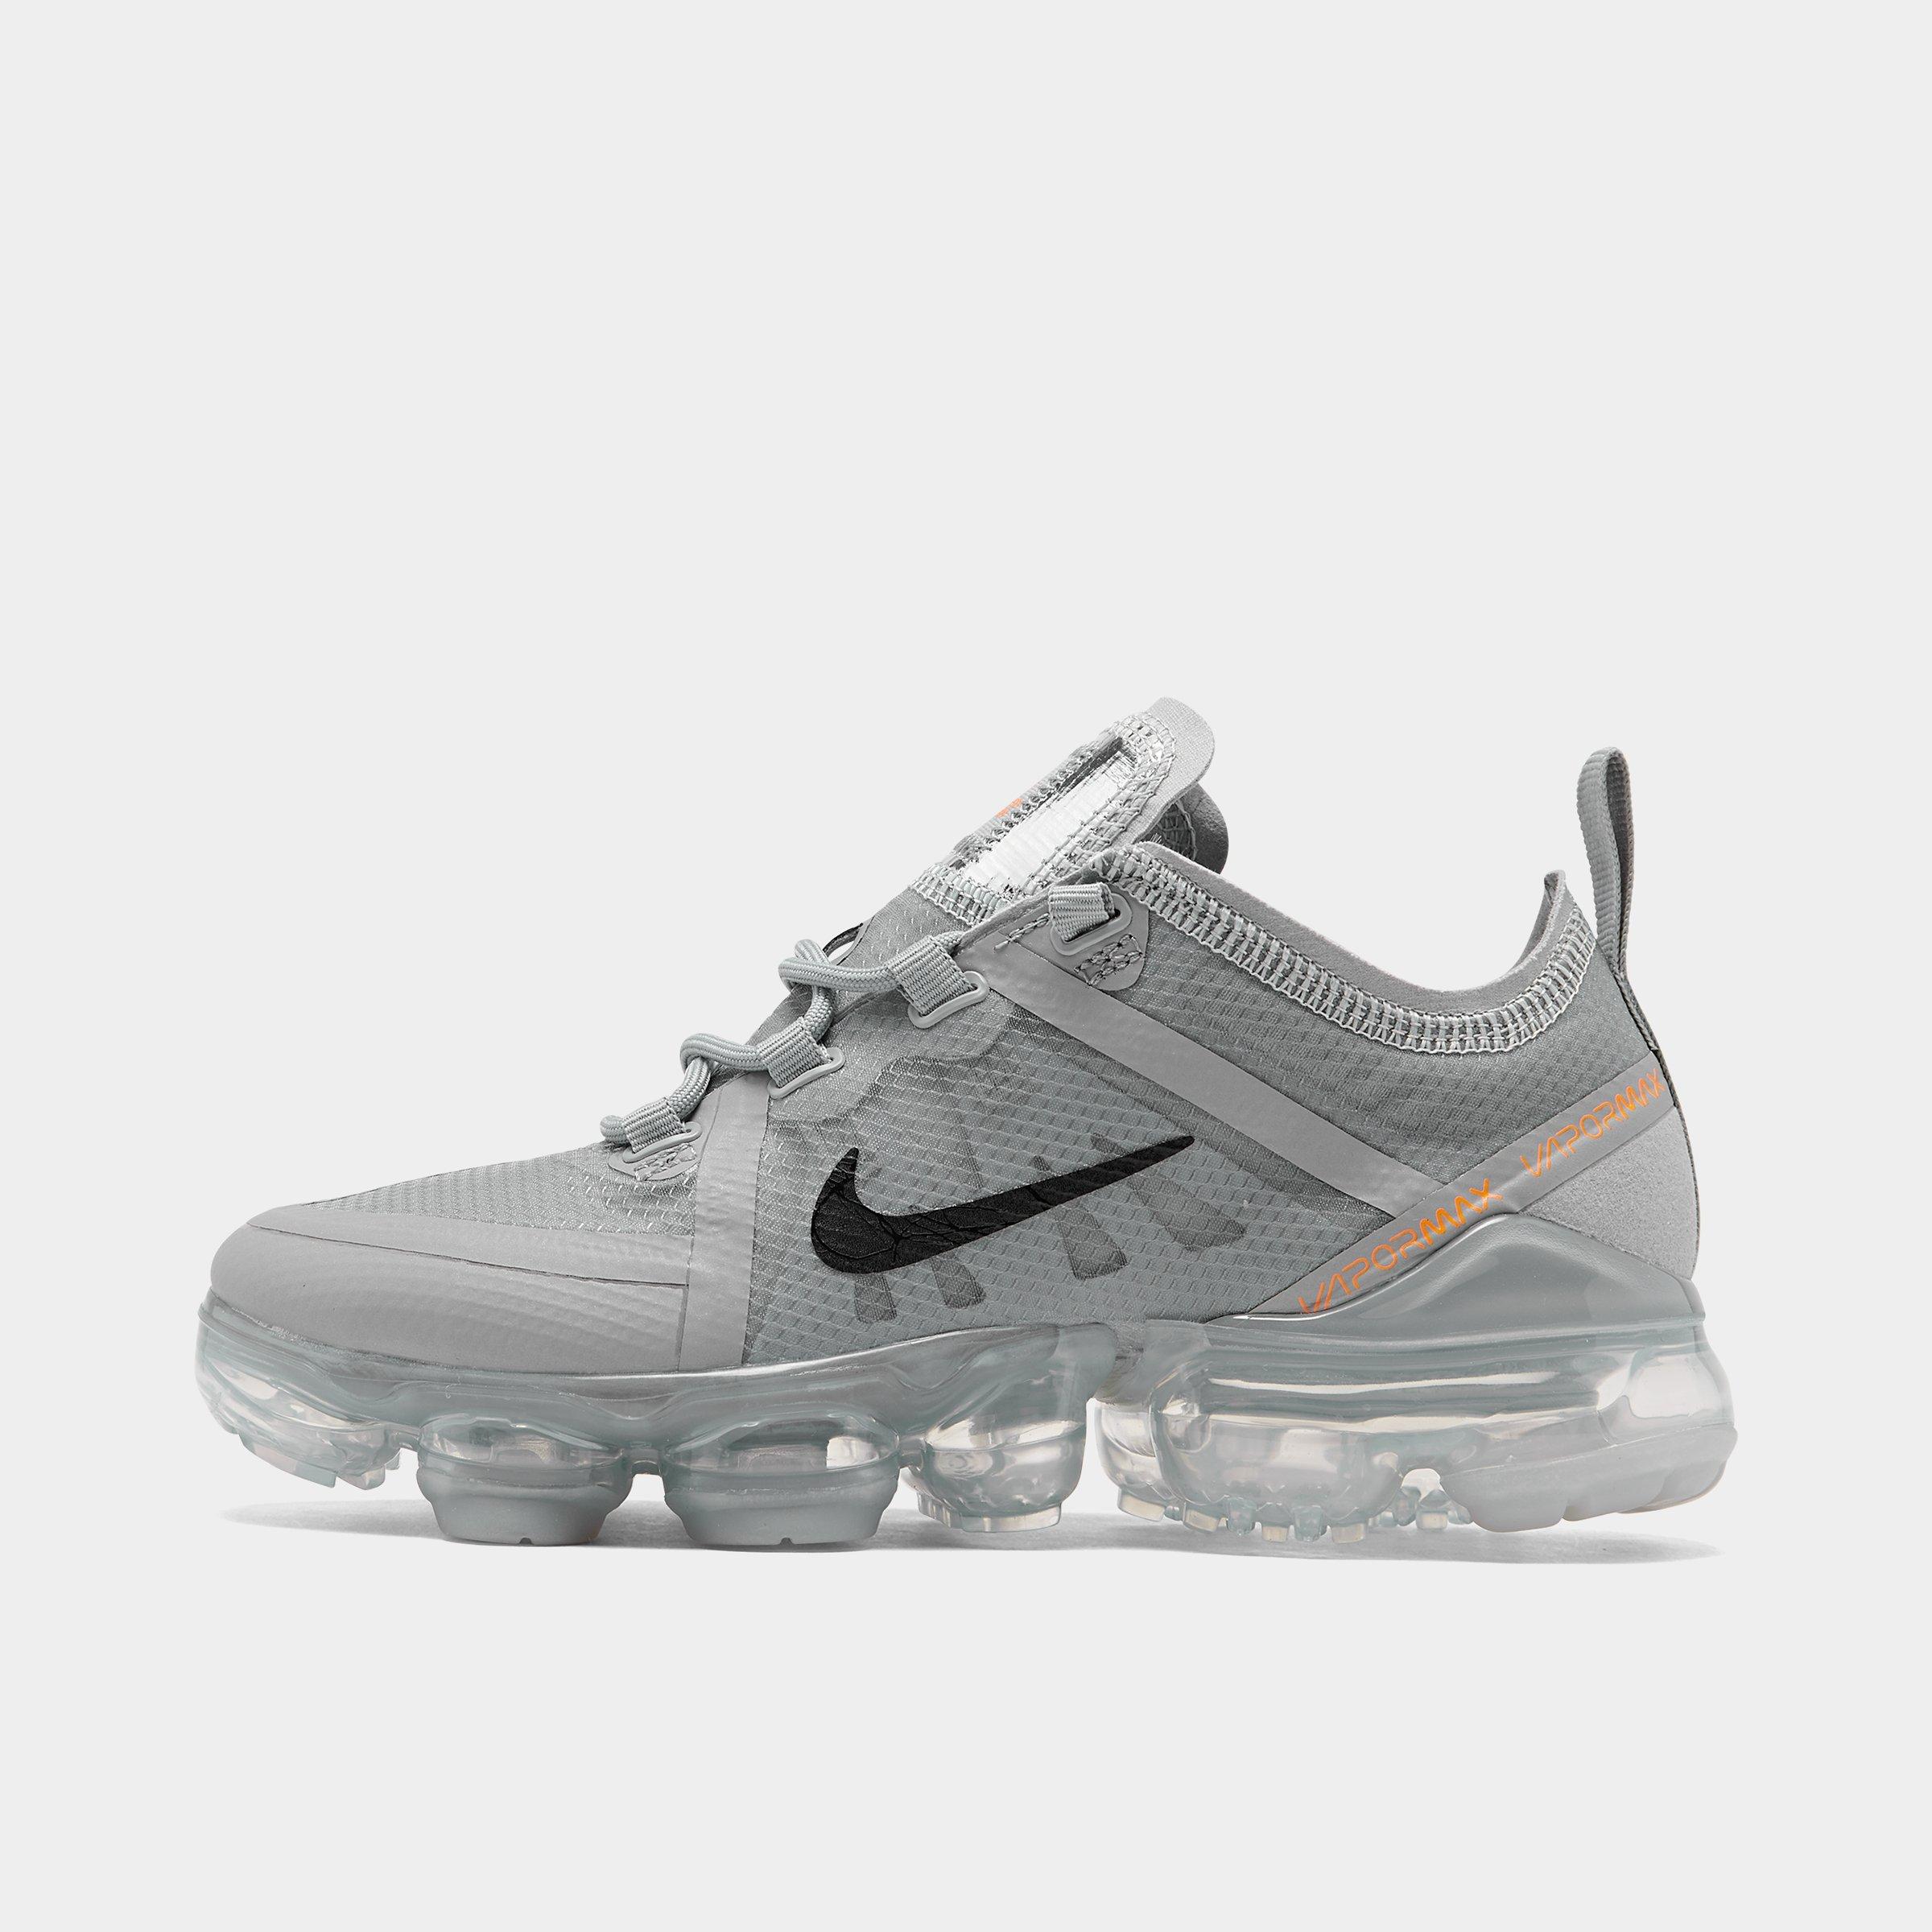 Nike Air Vapormax Plus Shoes Covered In Zig Zag R44 Prices i